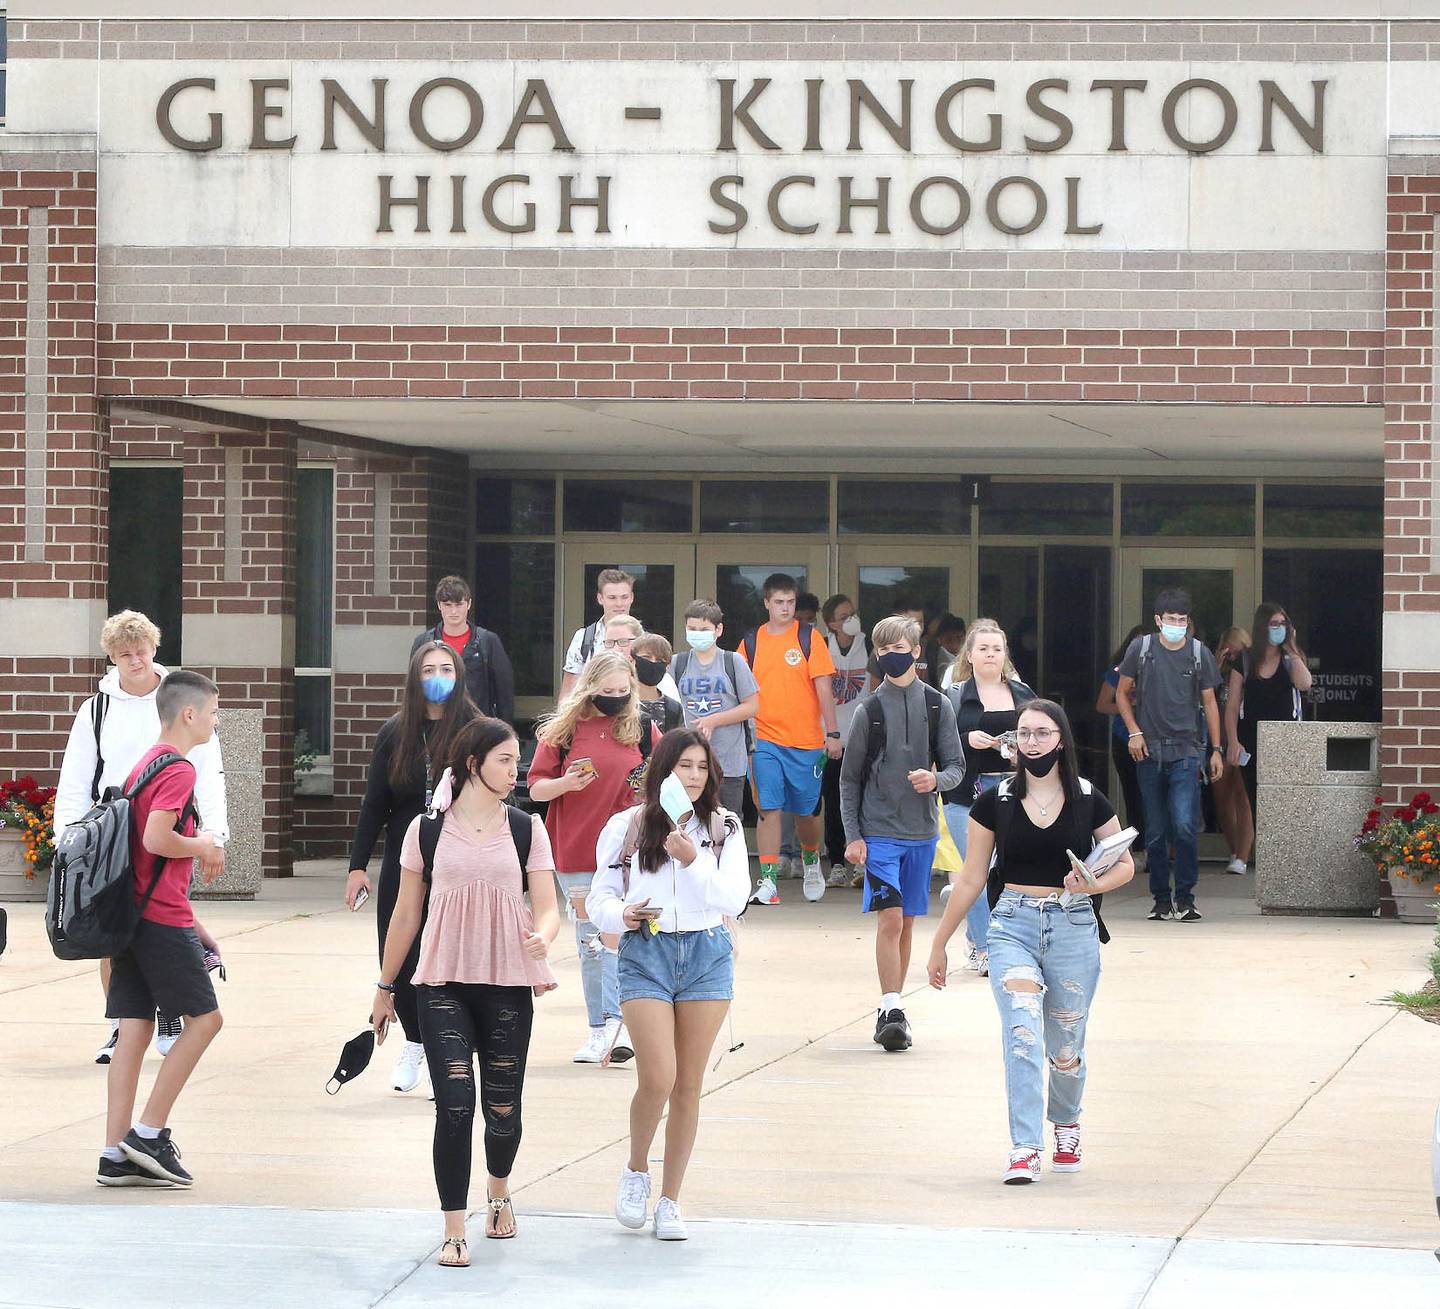 Students remove their masks as they exit Genoa-Kingston High School Monday after finishing up their first day of in-person classes. School District 424 is using a hybrid schedule with a full remote option to start the year.